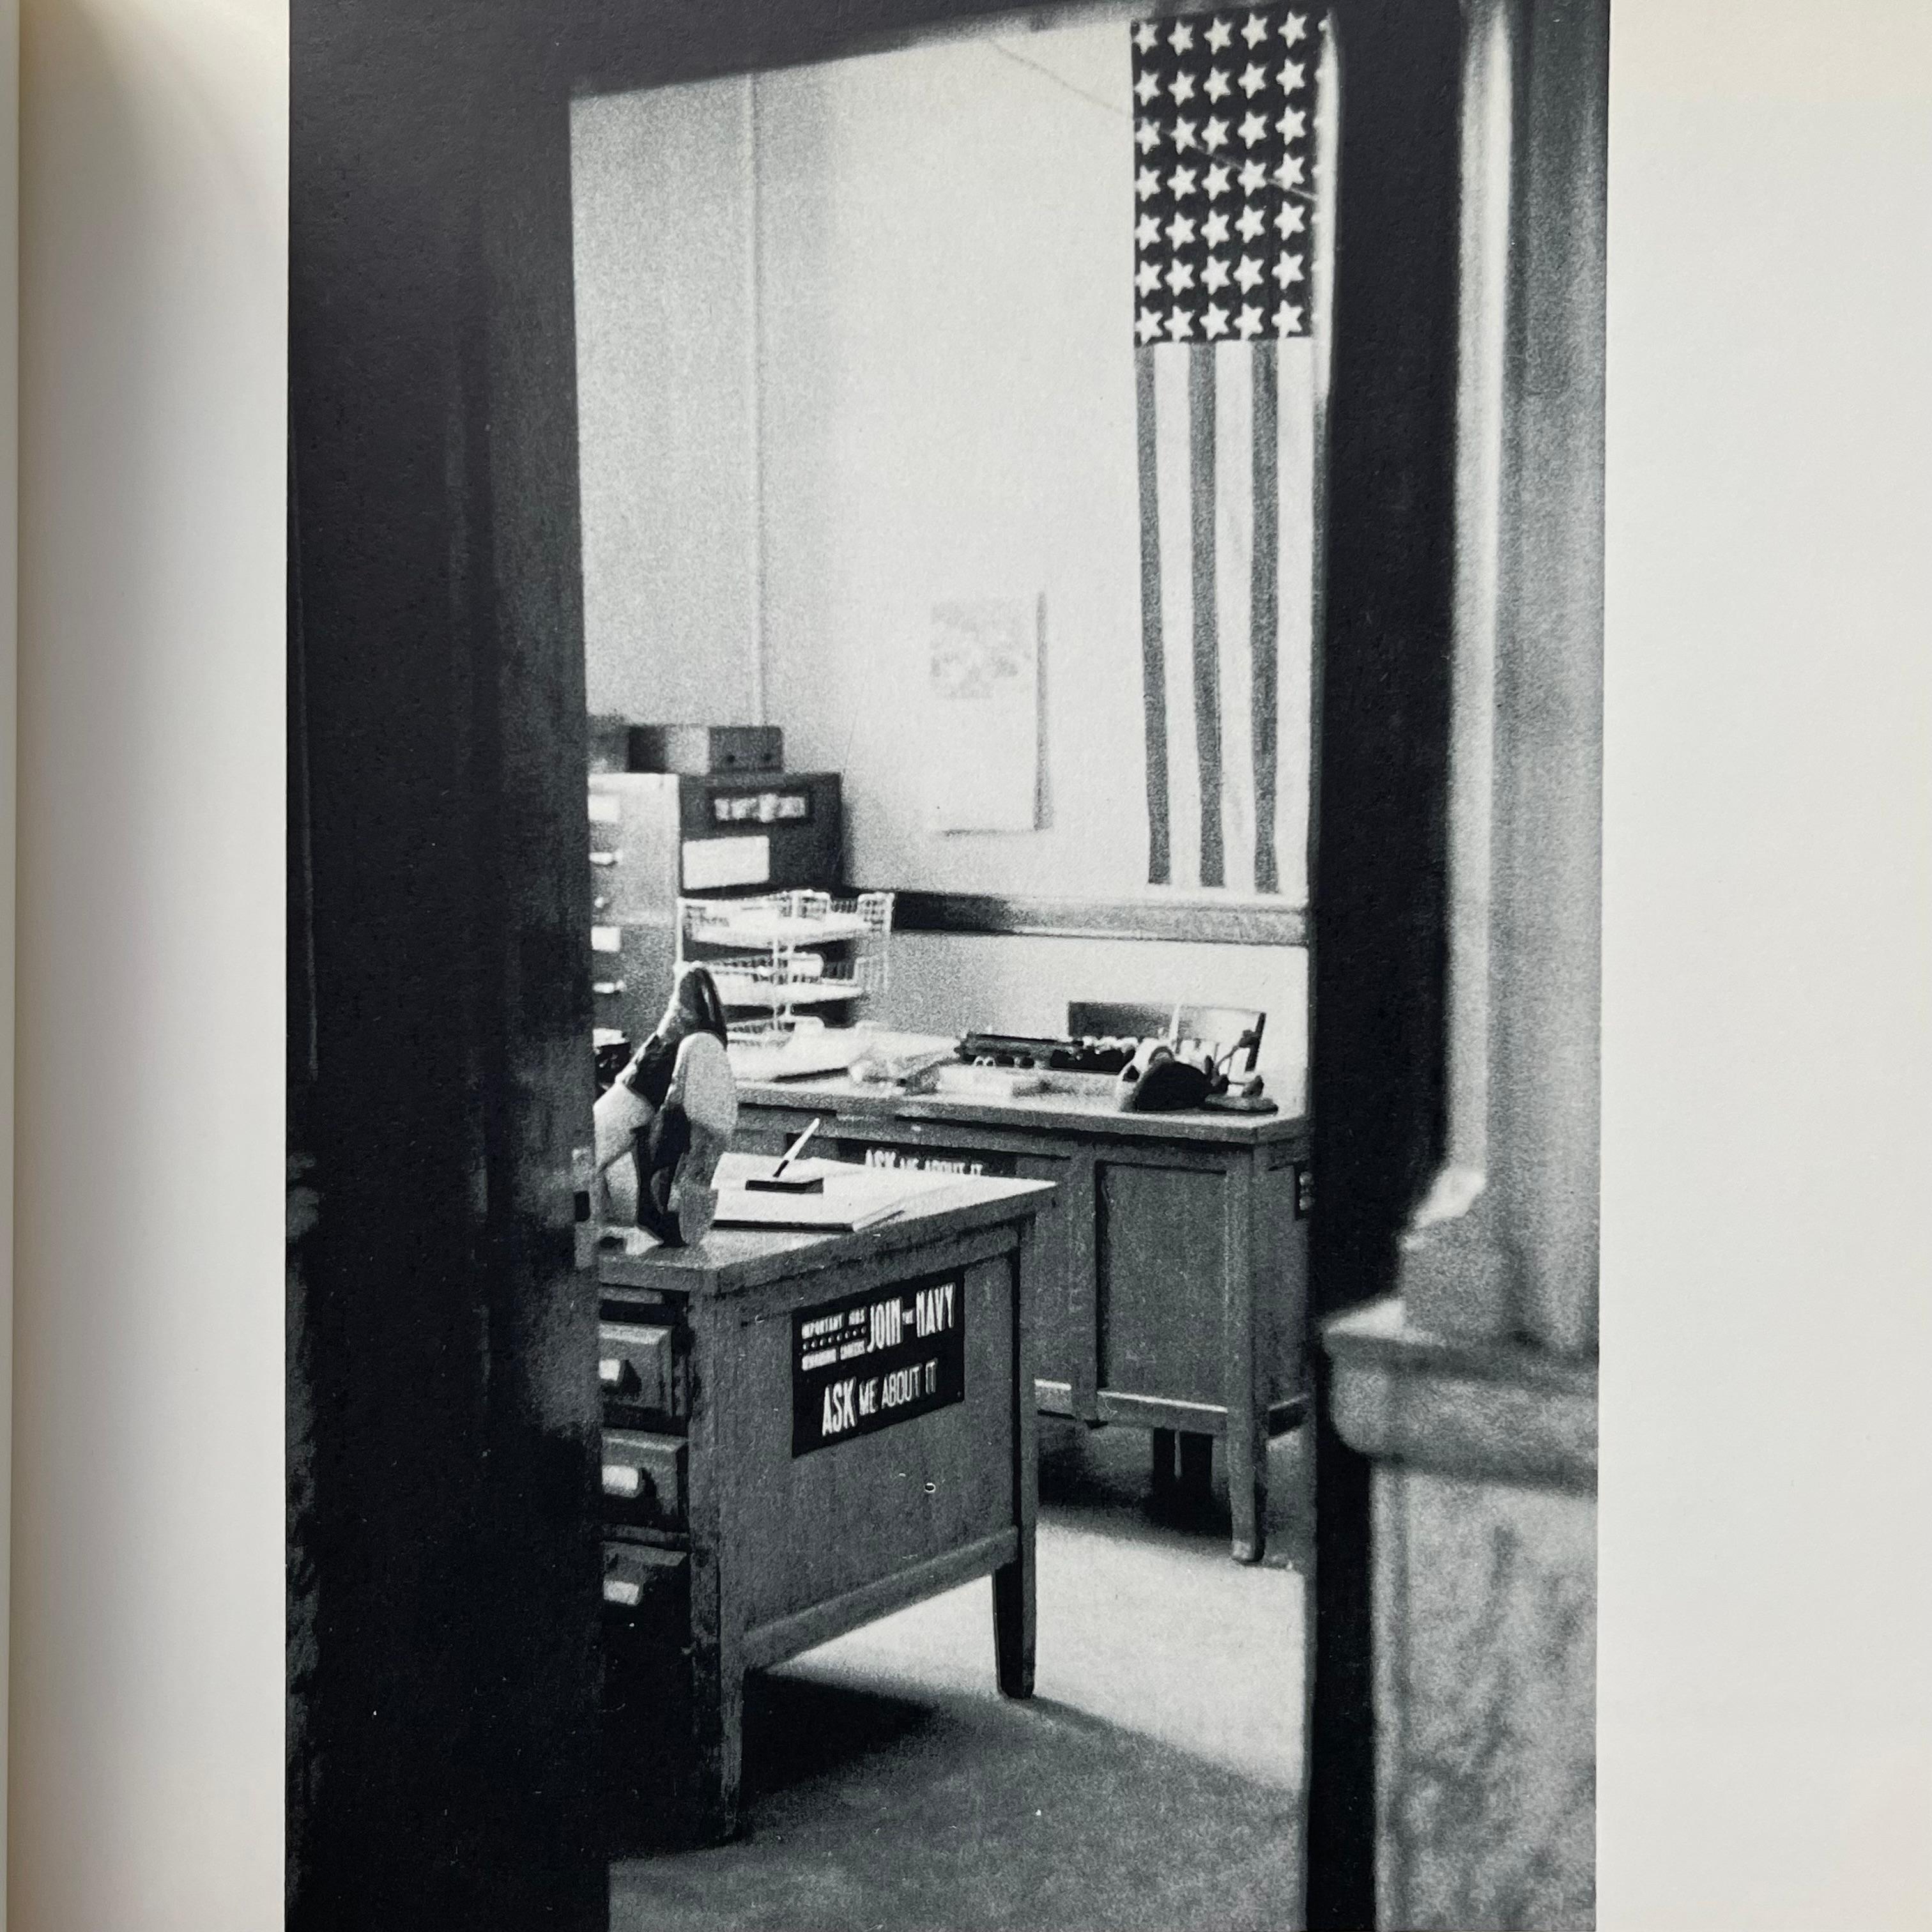 The Americans Robert Frank, Jack Kerouac 1st Enlarged Ed. 1969 For Sale 1